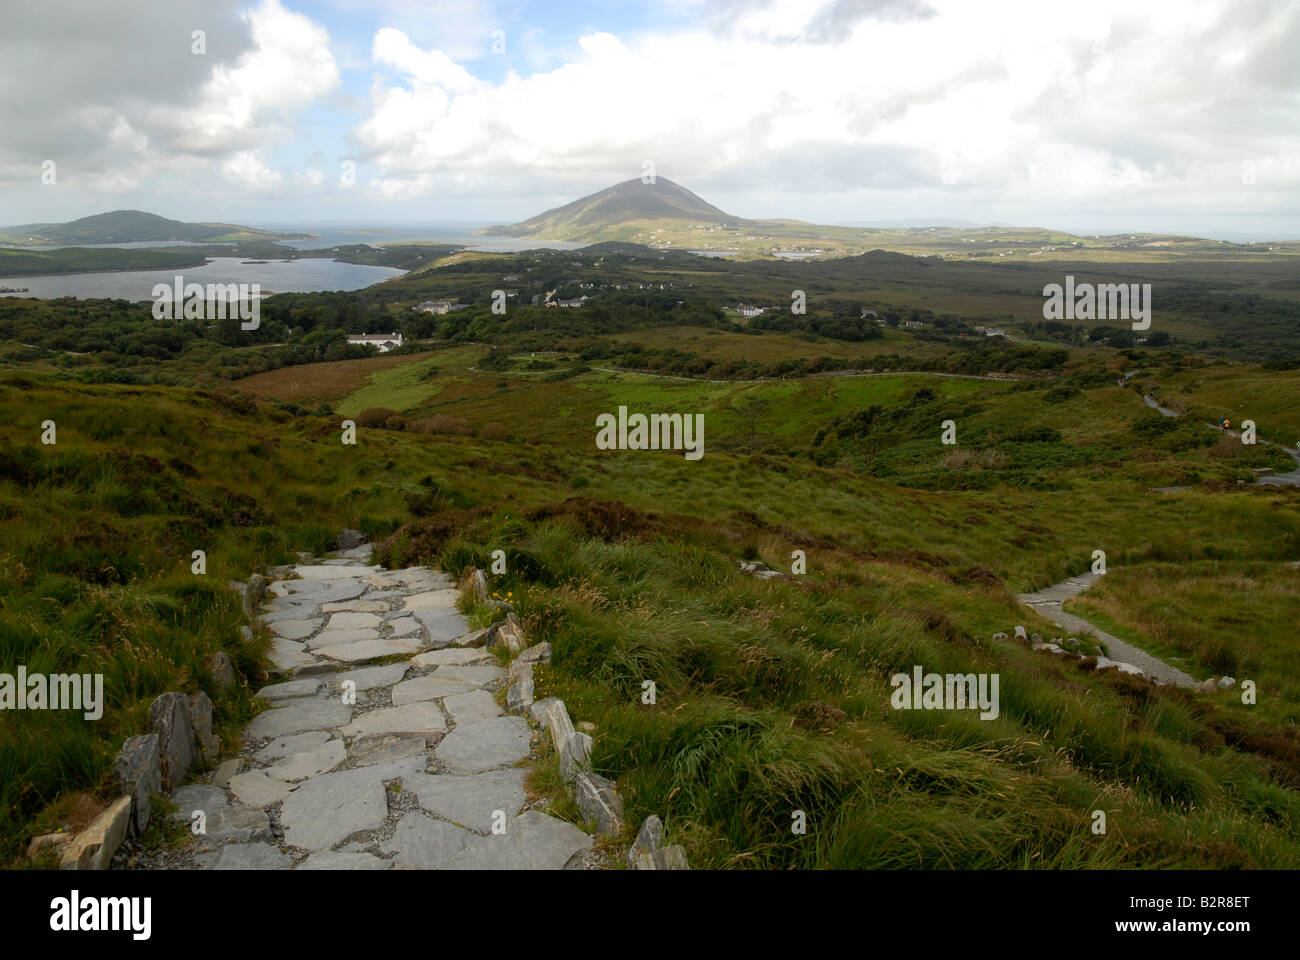 Hiking path in the Connemara National Park with the view down to the bay (Ballynakill Harbour). Stock Photo